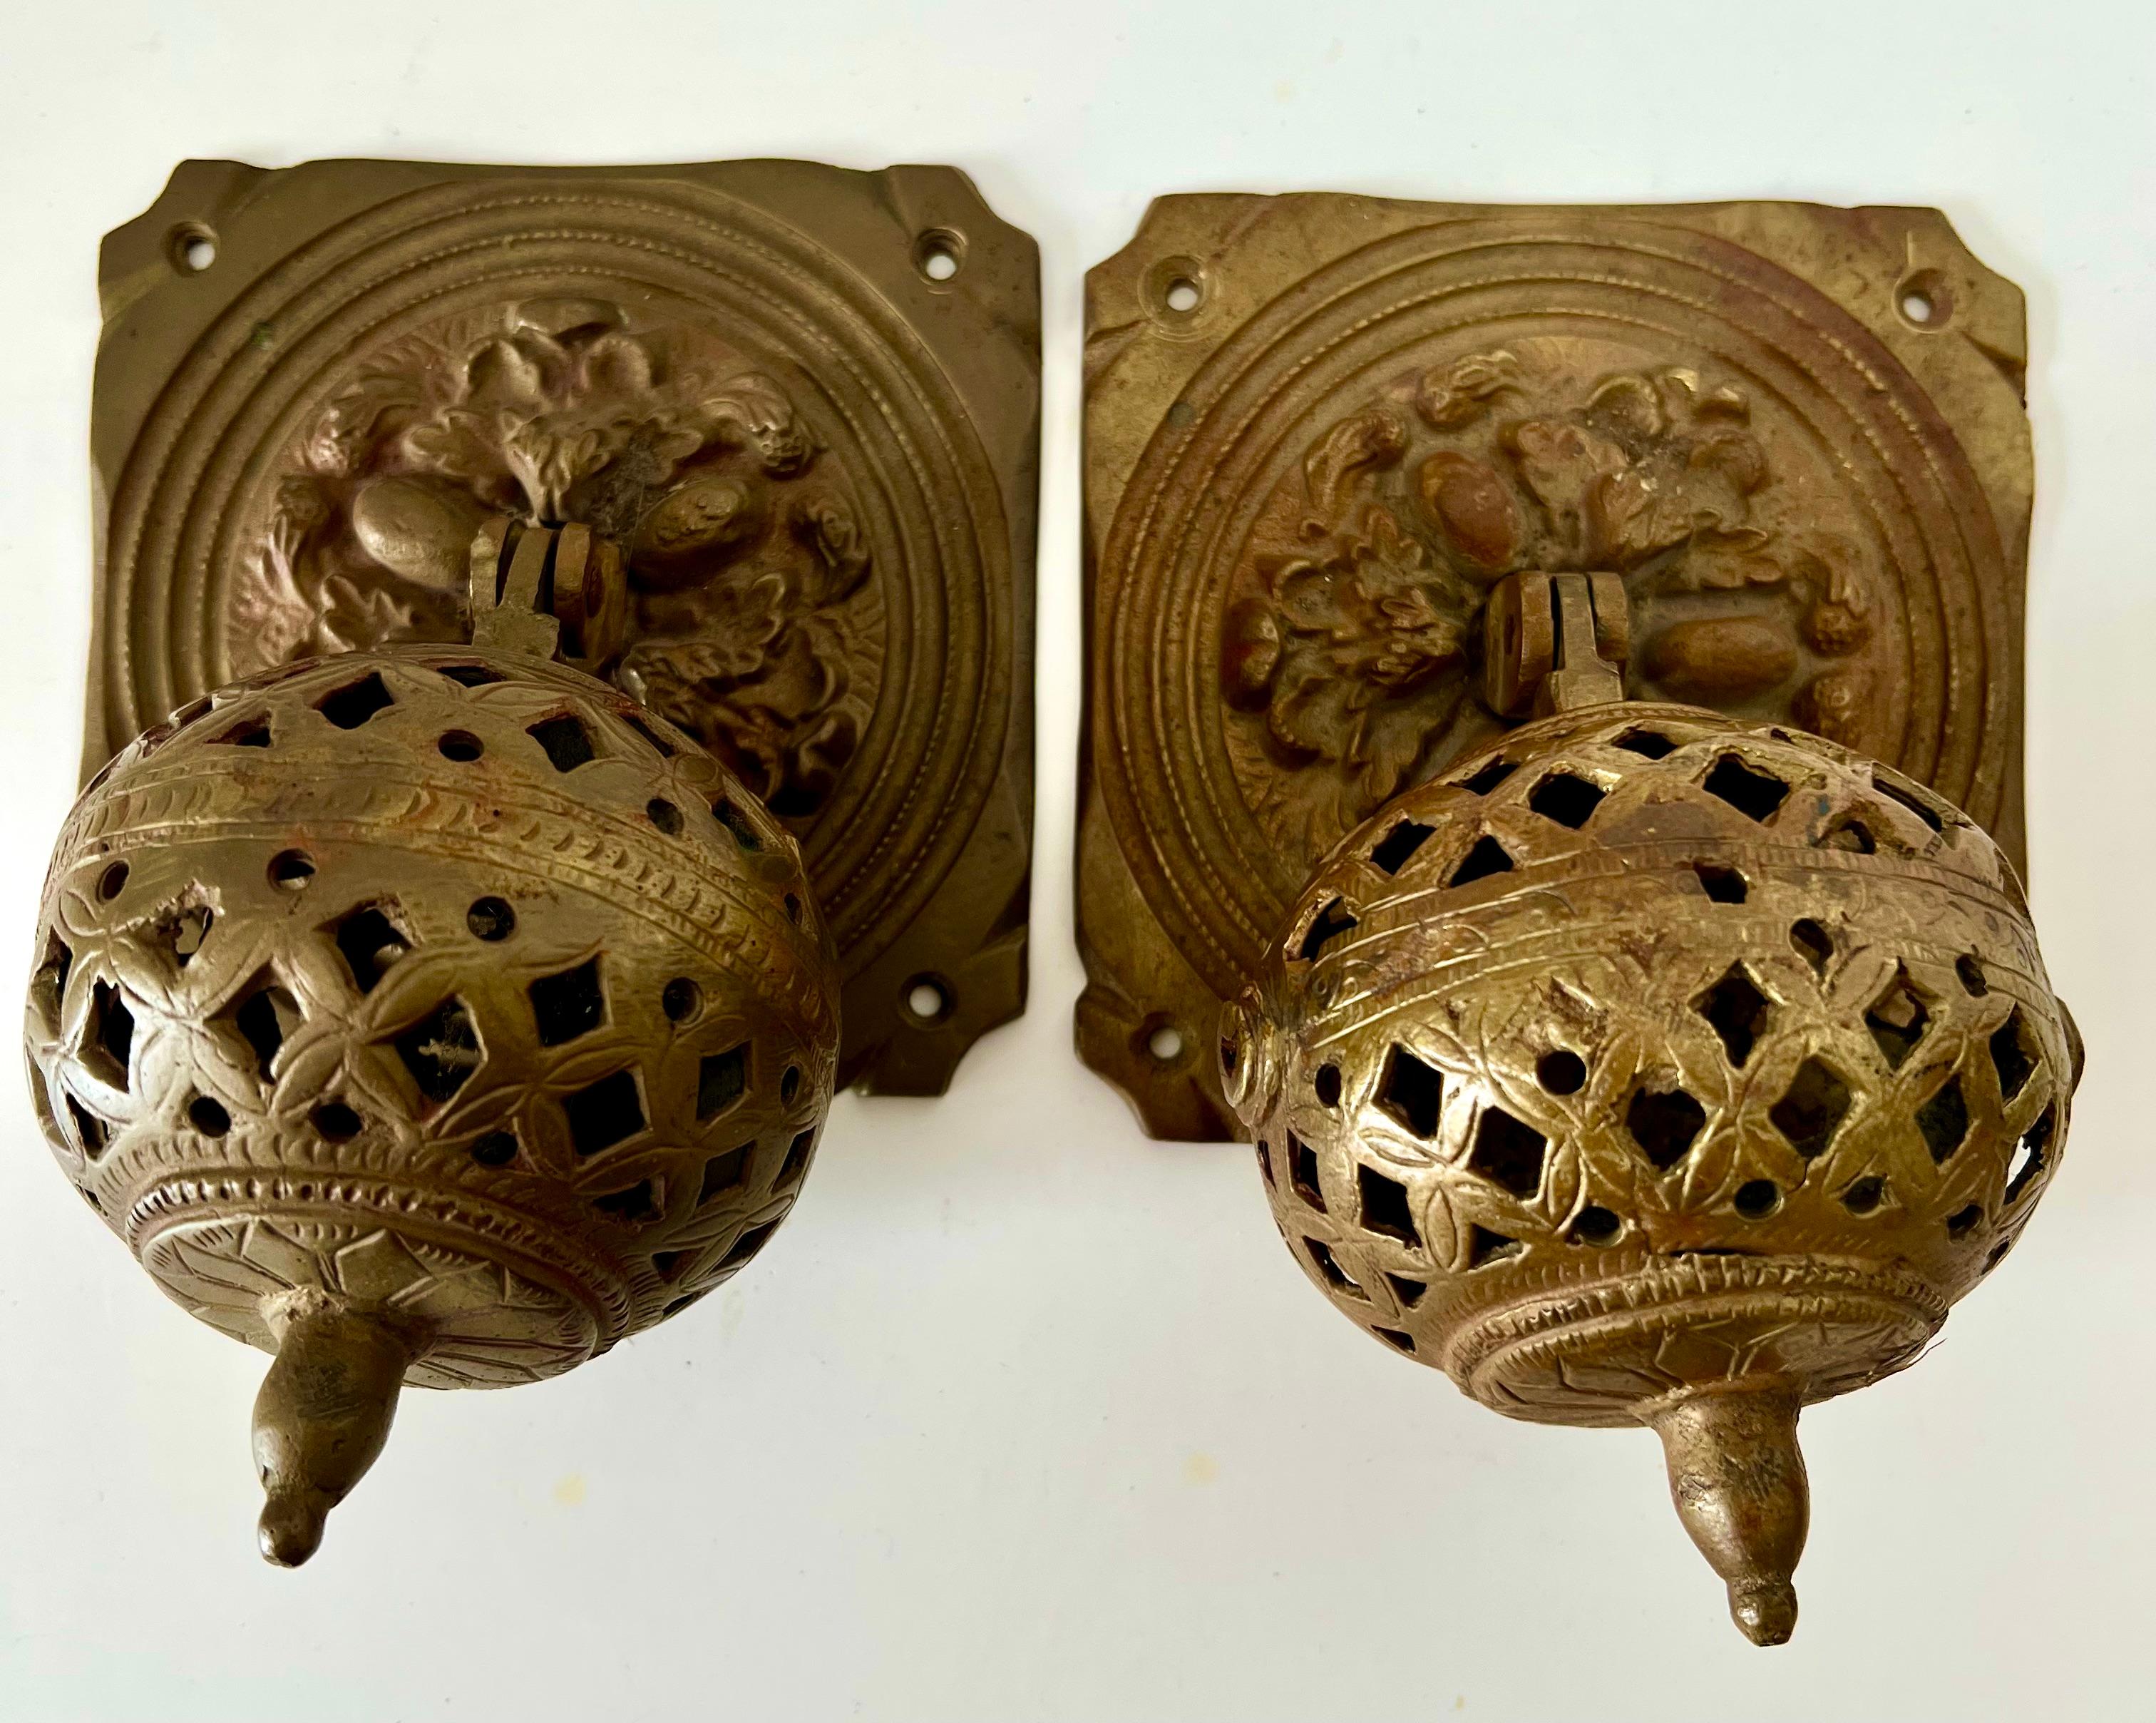 A pair of Moroccan / Moorish style door pulls or handles.  The pair are unique spheres intricately made and designed.   There were used at a design space and found prior to that in an estate sale.

Solid Brass and really wonderfully designed and a